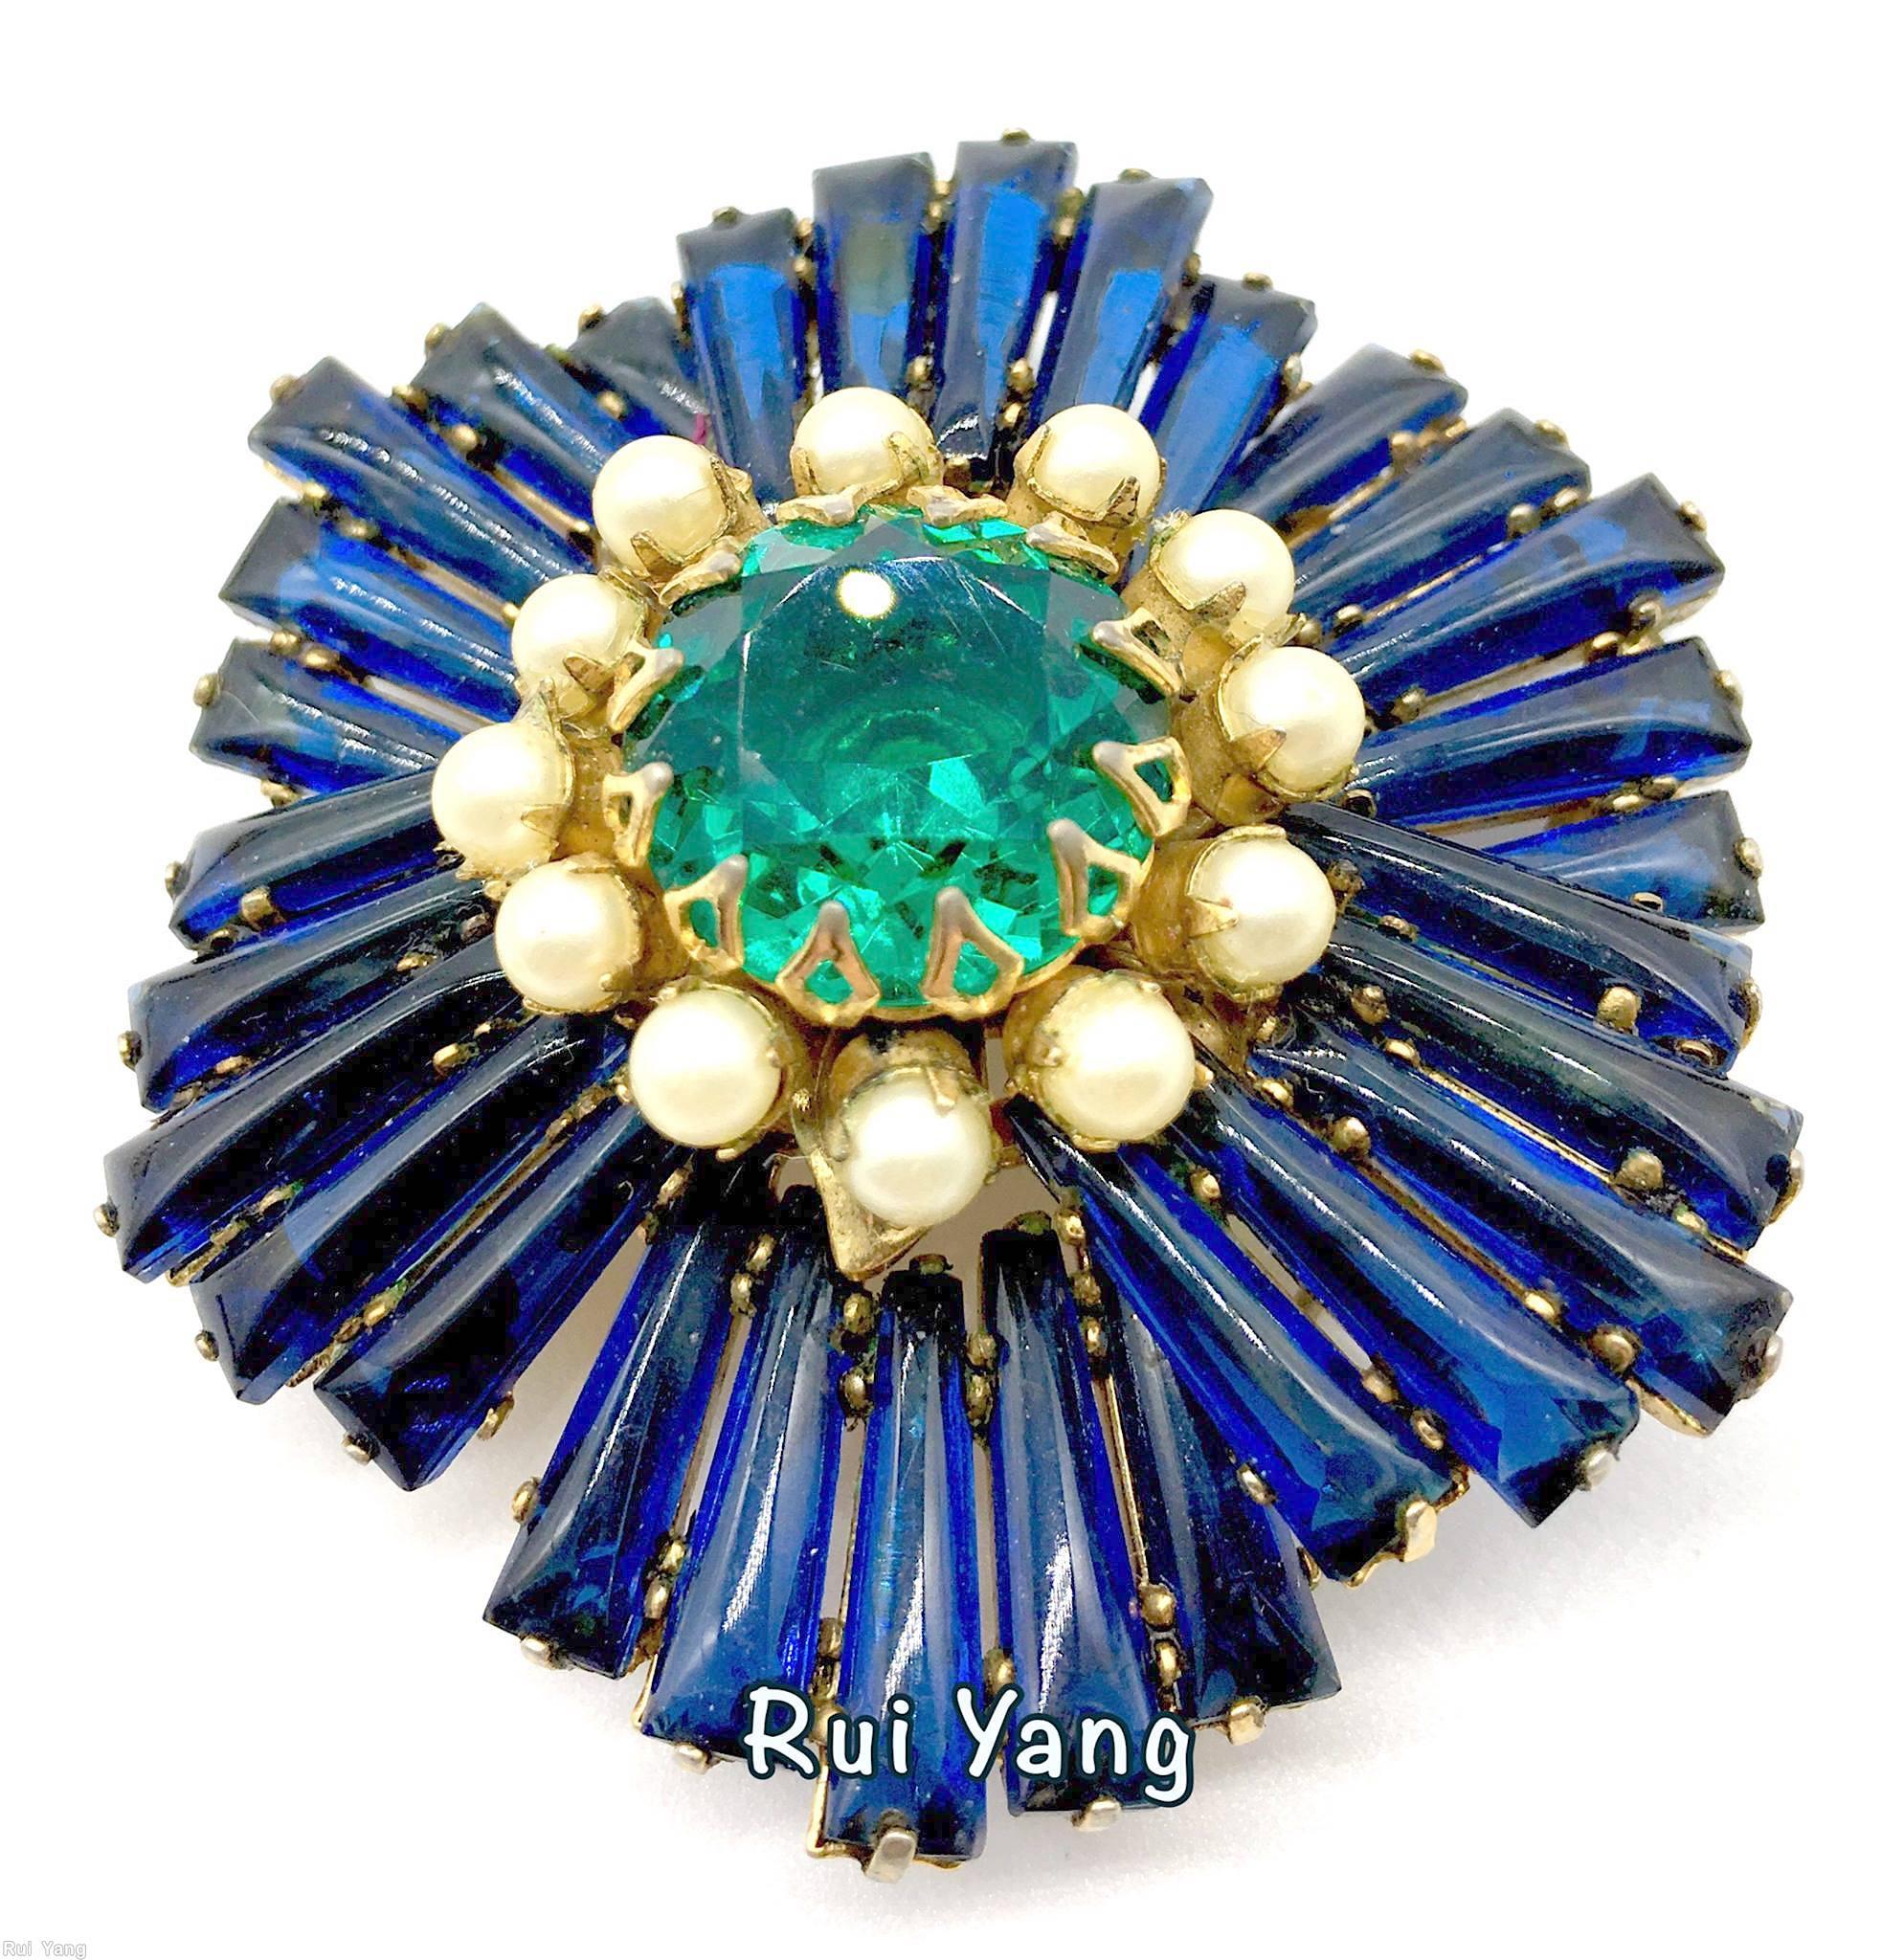 Schreiner 2 level 3 group of 5 keystone pin large round cab center stone 12 surrounding small chaton marina blue keystone faux pearl green chaton center goldtone jewelry